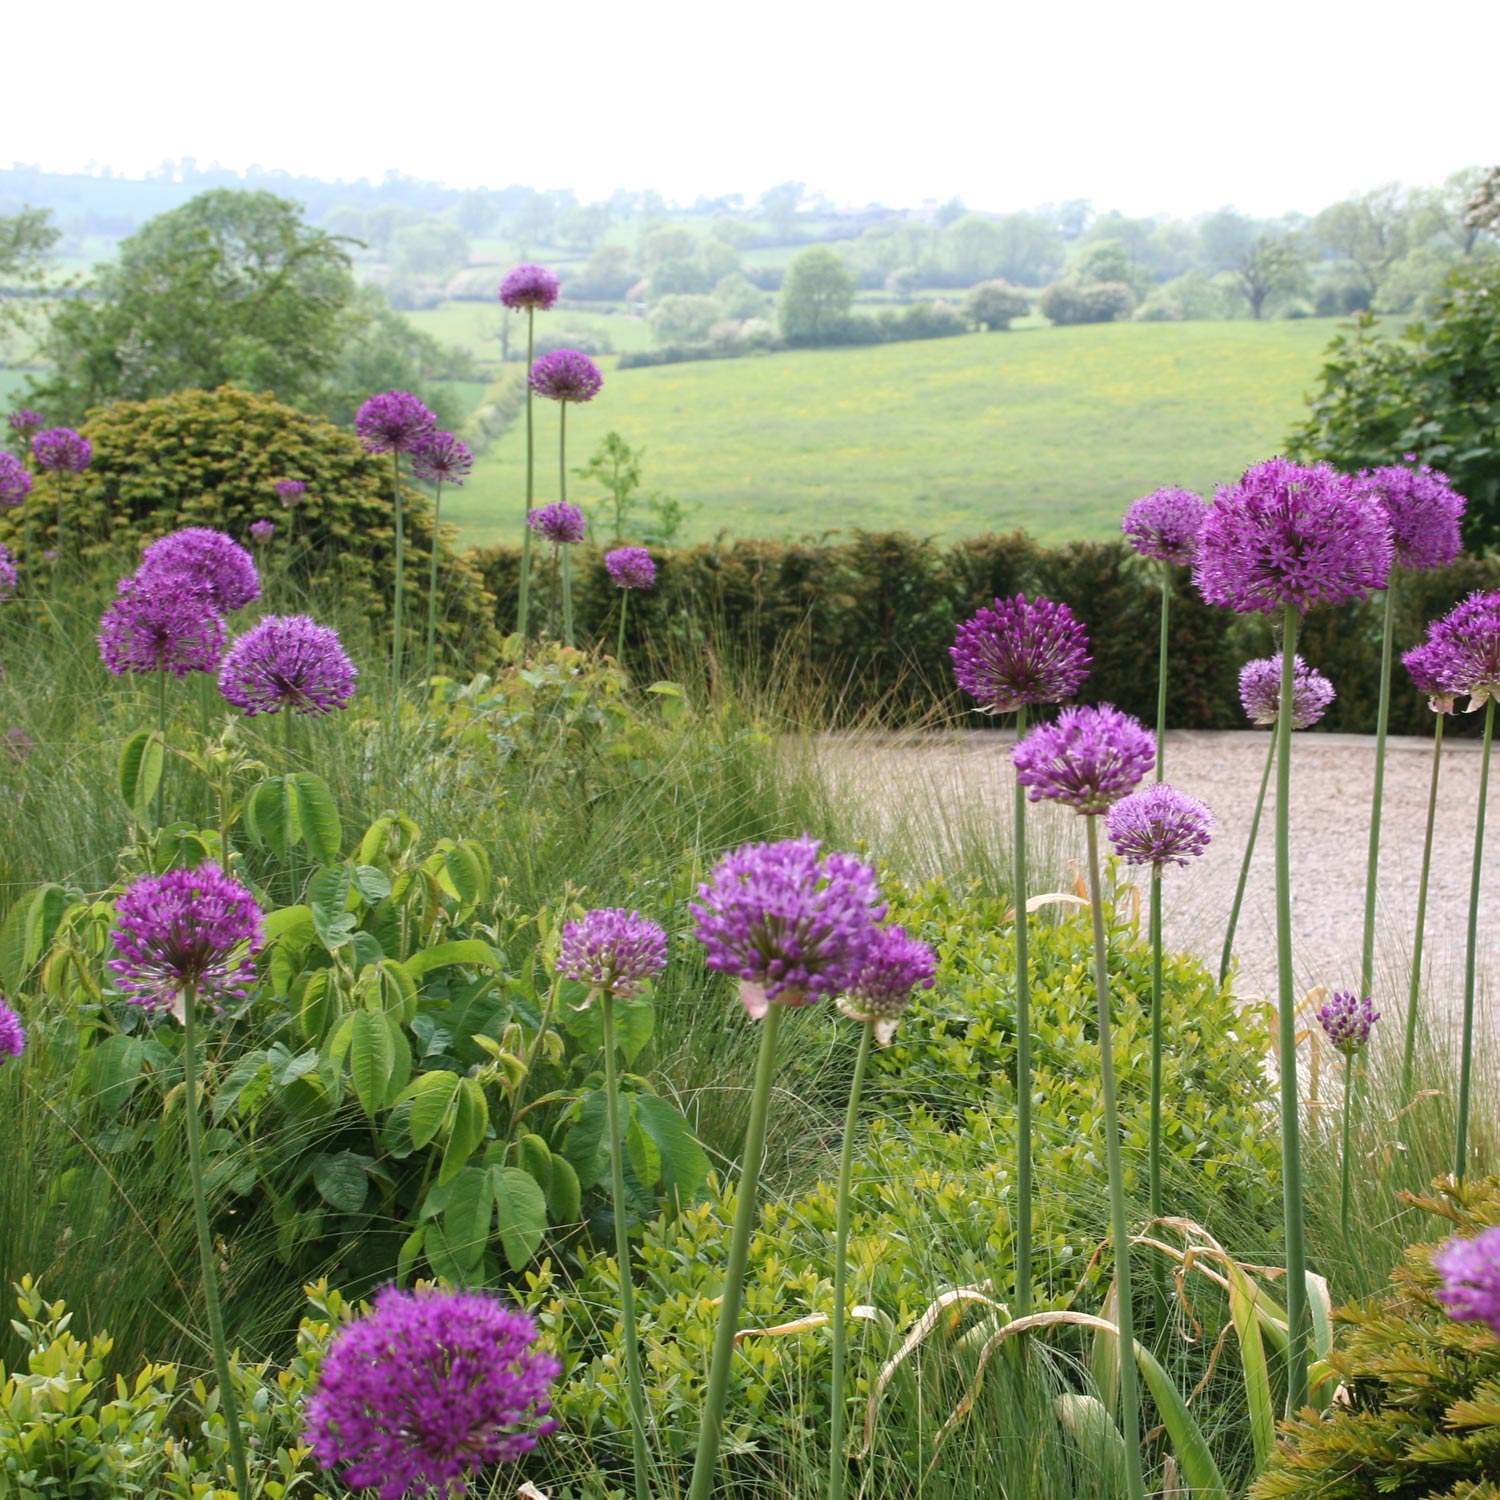 Saddington Hall 12 Drumsticks of allium heads provide seasonal accent and contrast to the naturalistic soft grasses